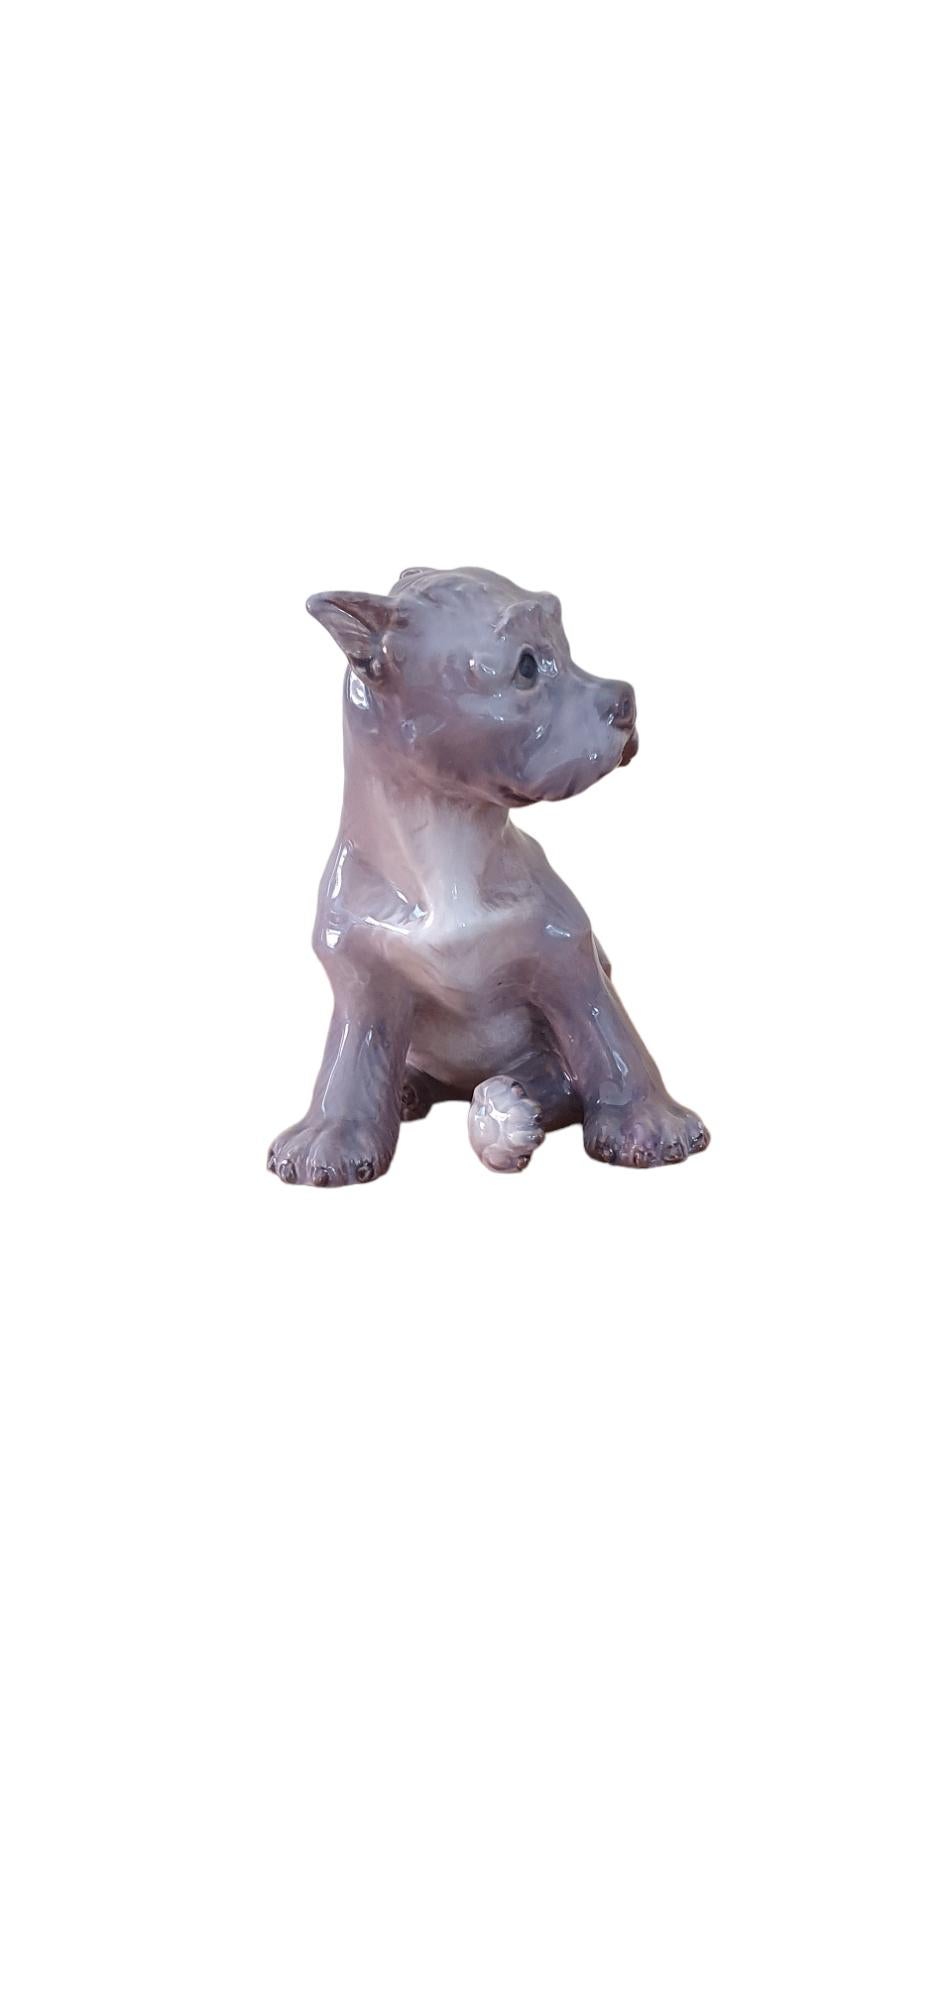 Beautiful Schnauzer Puppy, no. 1095, by Dahl Jensen. In excellent condition, this puppy is a fantastic example of why Dahl Jensen is one of the most sought after figurine makers. The attention to detail and emotion depicted in this figurine, makes